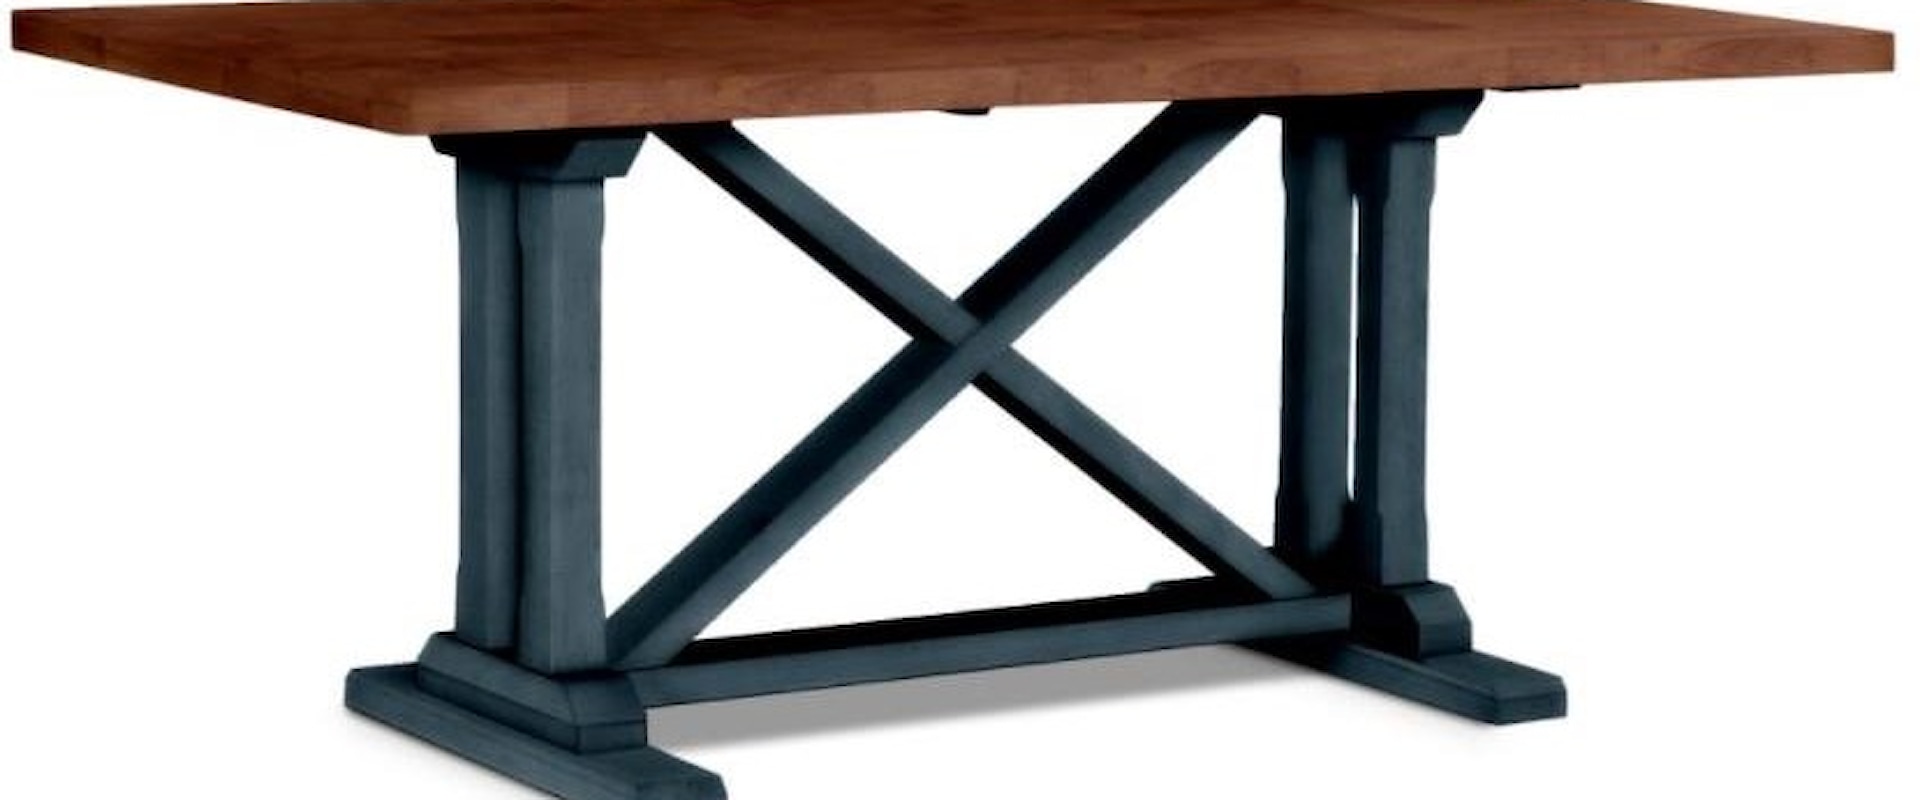 6 Piece Two-Tone Trestle Dining Set with Bench